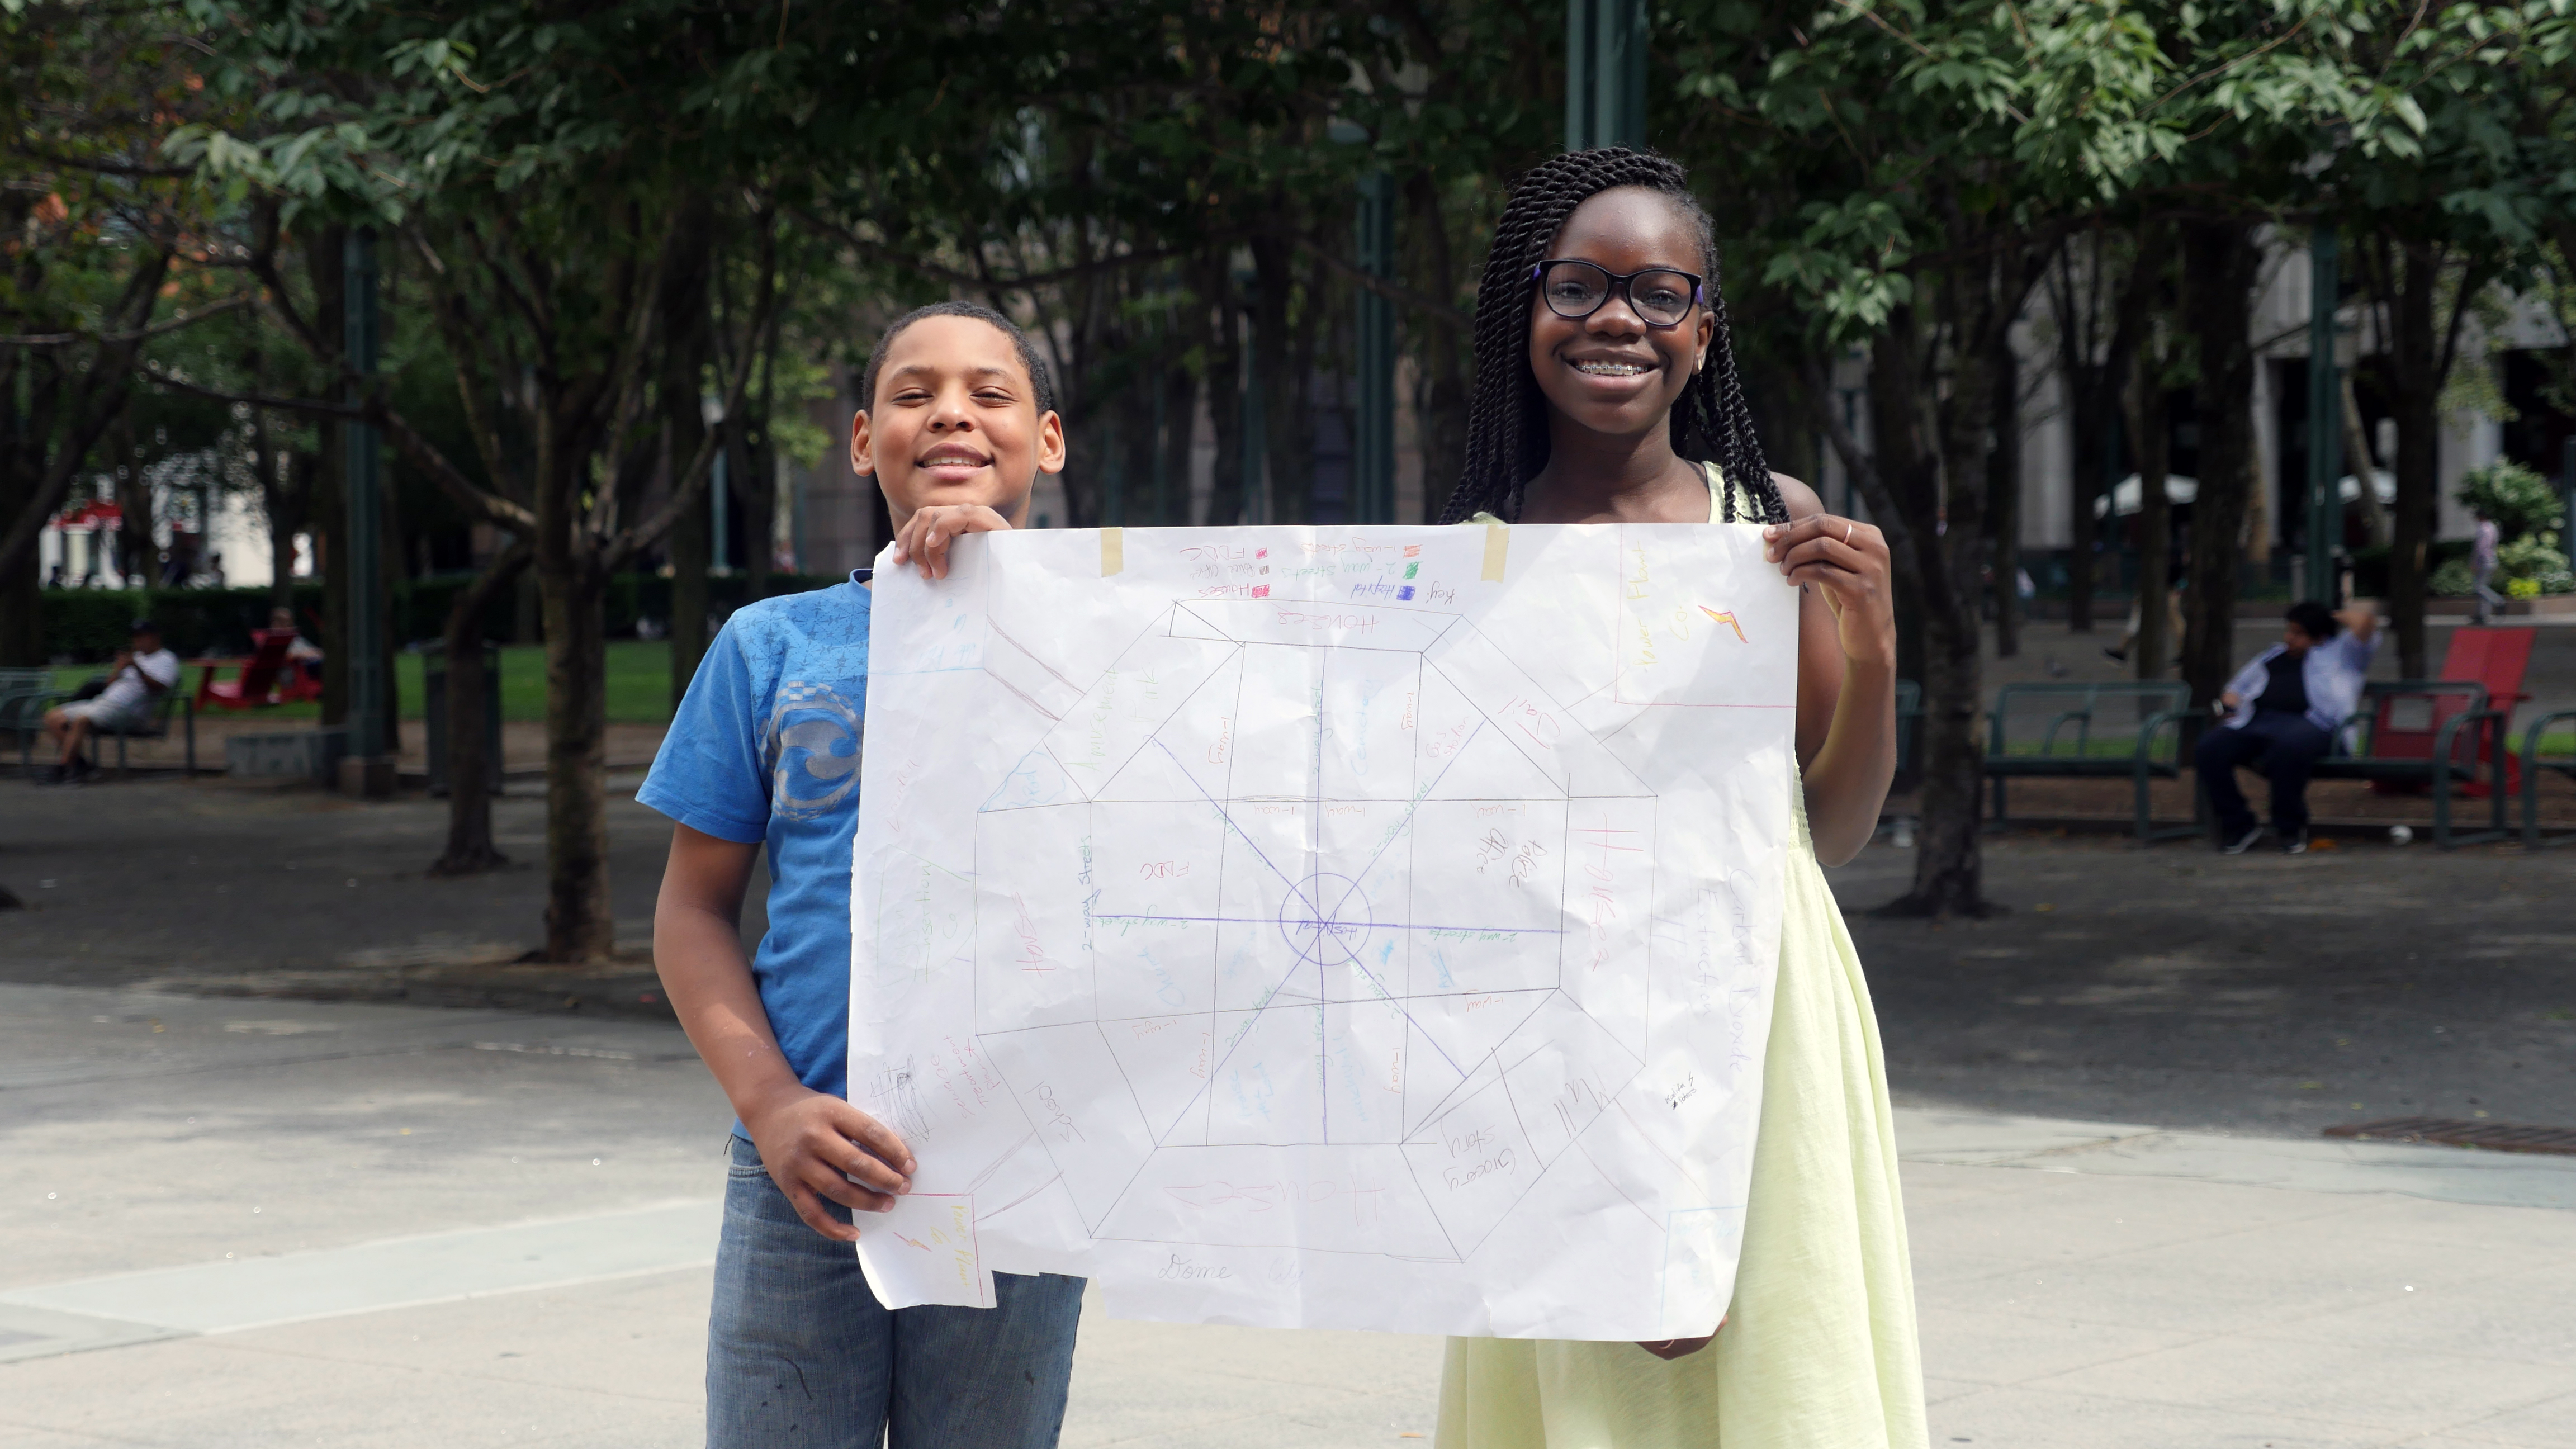 “Science of Smart Cities helps us learn things that we never knew before, also how to help our environment.” - Hassan (left) “Science of Smart Cities helps us to be more aware of our surroundings, and be more conservative of our trees and the oxygen that they give us and the electricity that we use from them.” - Kalifa (left)